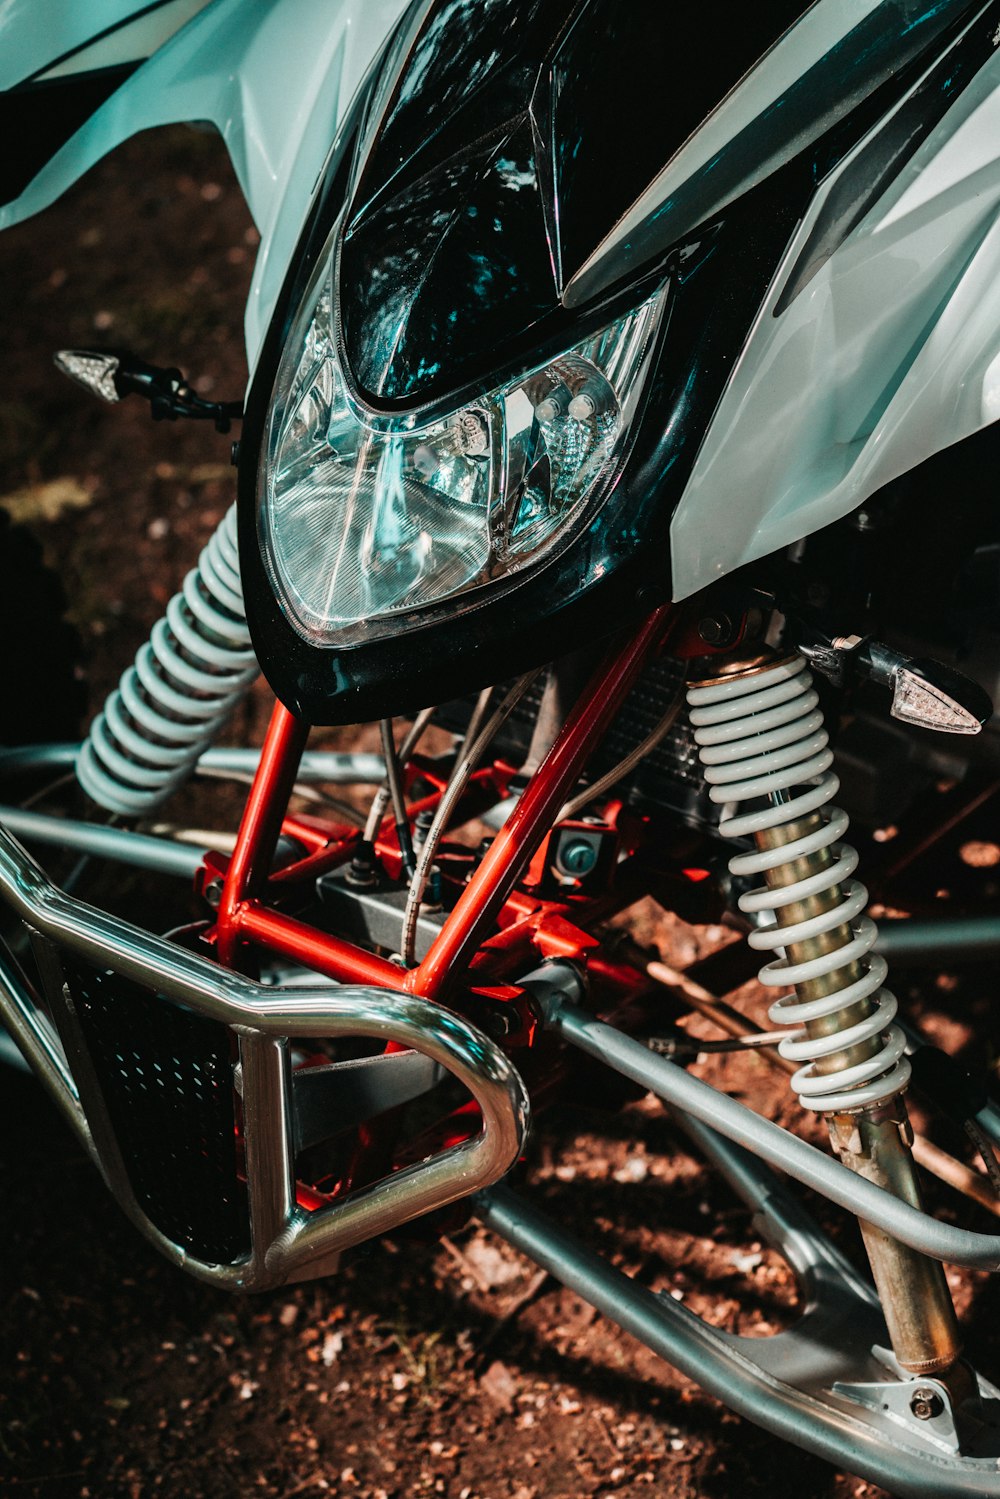 black and red motorcycle in close up photography